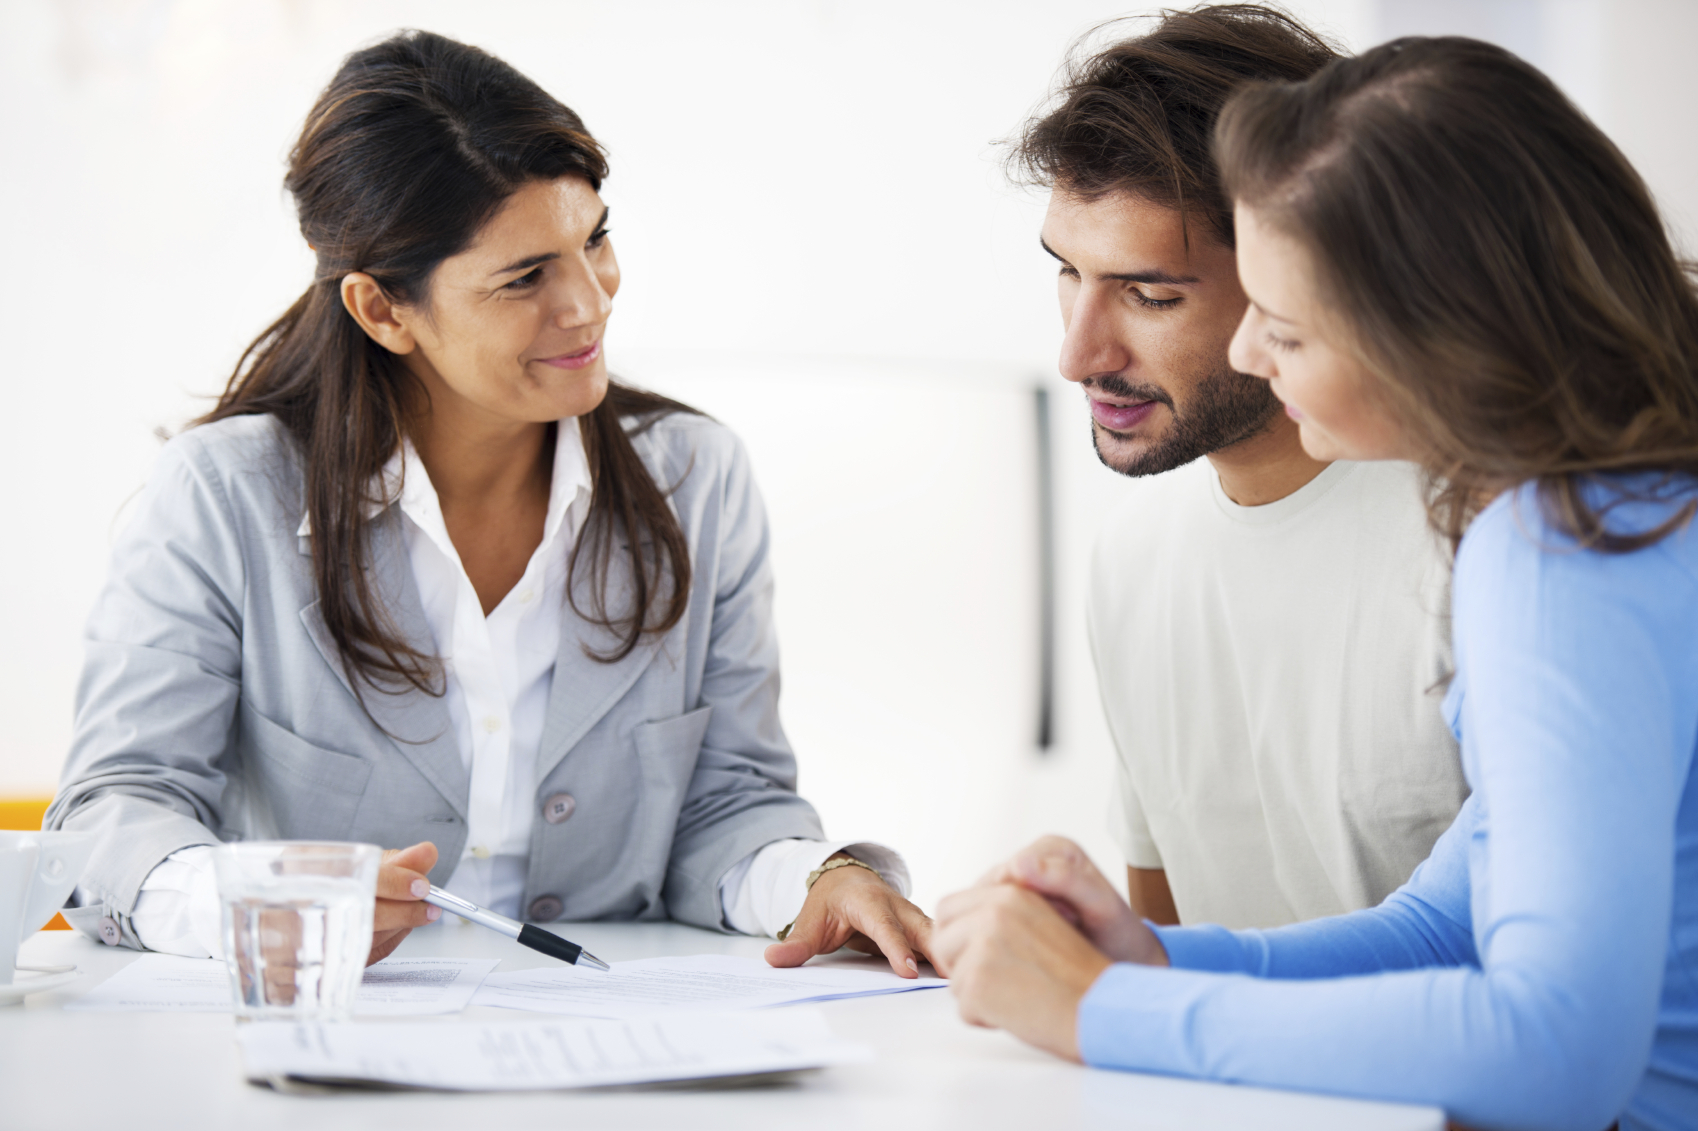 Financial consultant presents bank investments to a young couple. Taken at iStockalypse Milan.

[url=http://www.istockphoto.com/search/lightbox/9786786][img]http://dl.dropbox.com/u/40117171/couples.jpg[/img][/url]

[url=http://www.istockphoto.com/search/lightbox/9786622][img]http://dl.dropbox.com/u/40117171/business.jpg[/img][/url]